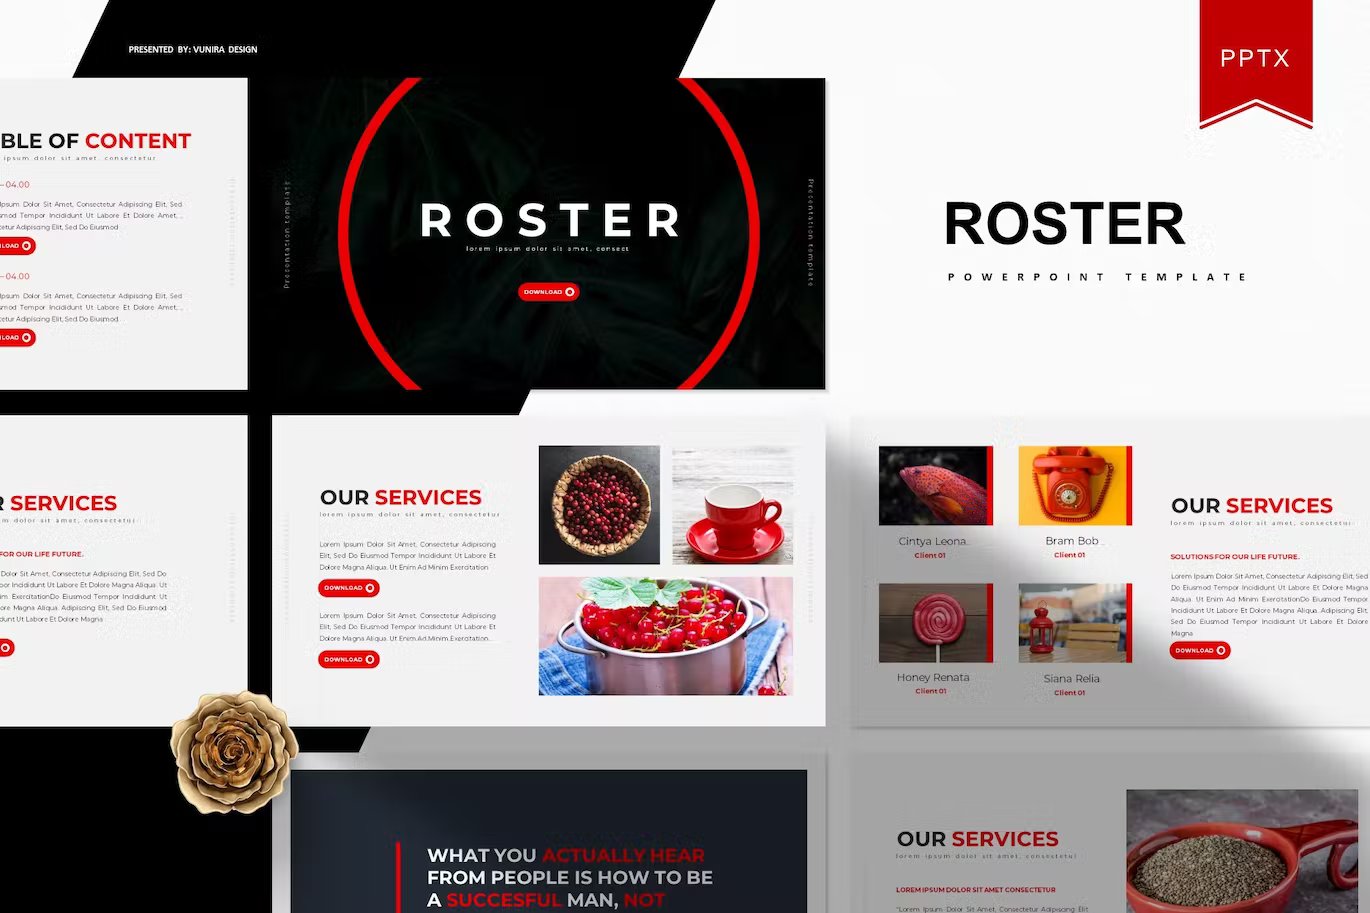 Black lettering "Roster Powerpoint Template" and different templates on a gray background.